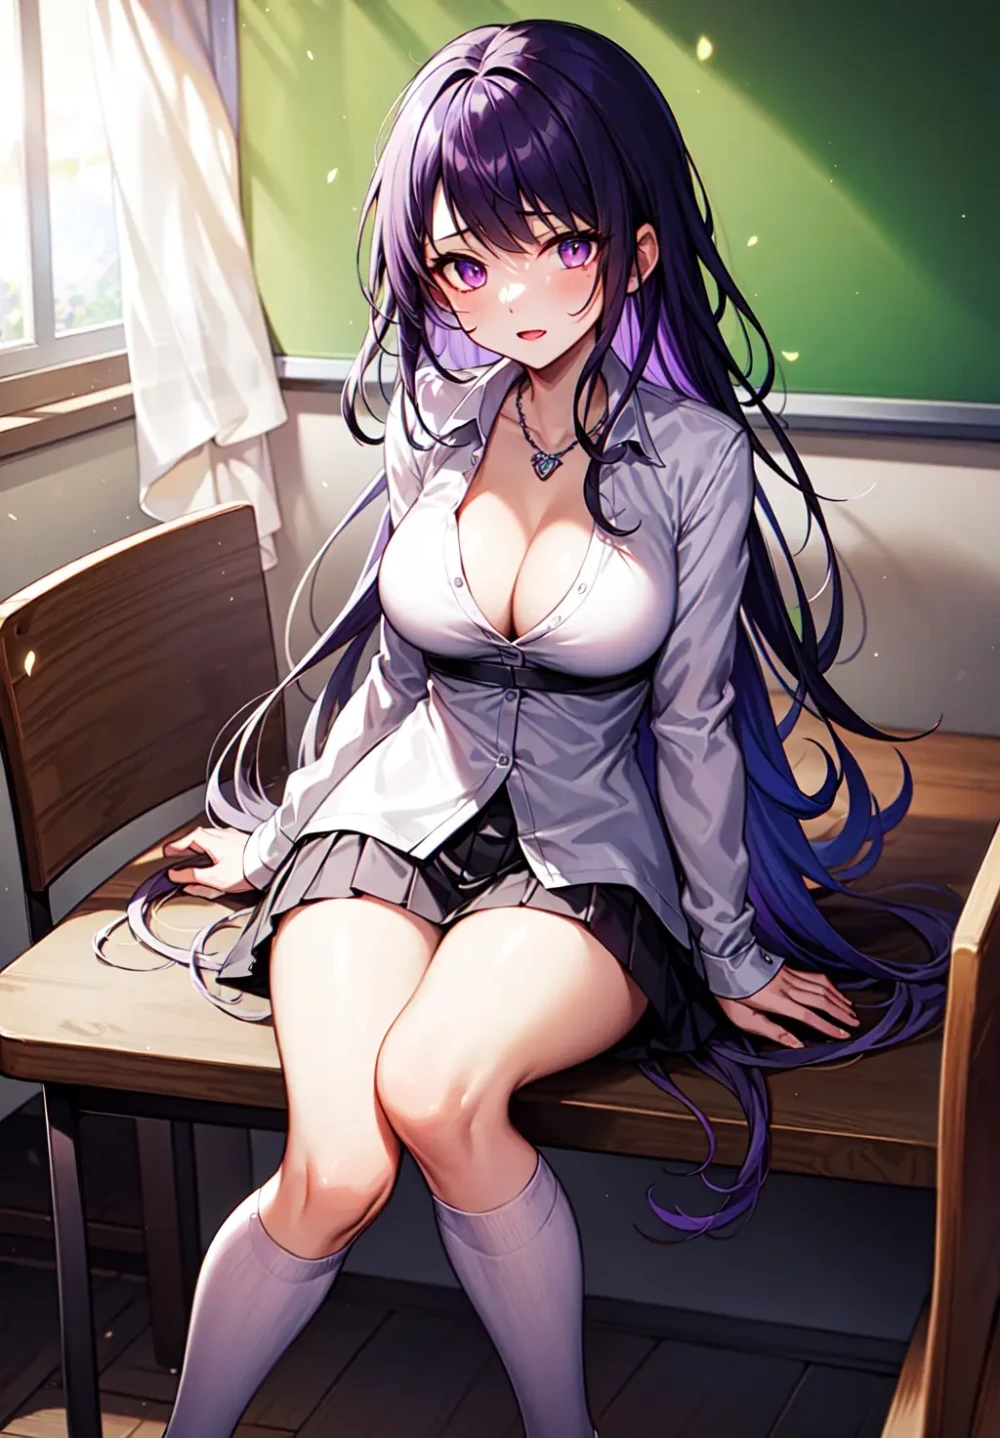 school-uniform-anime-style-all-ages-22